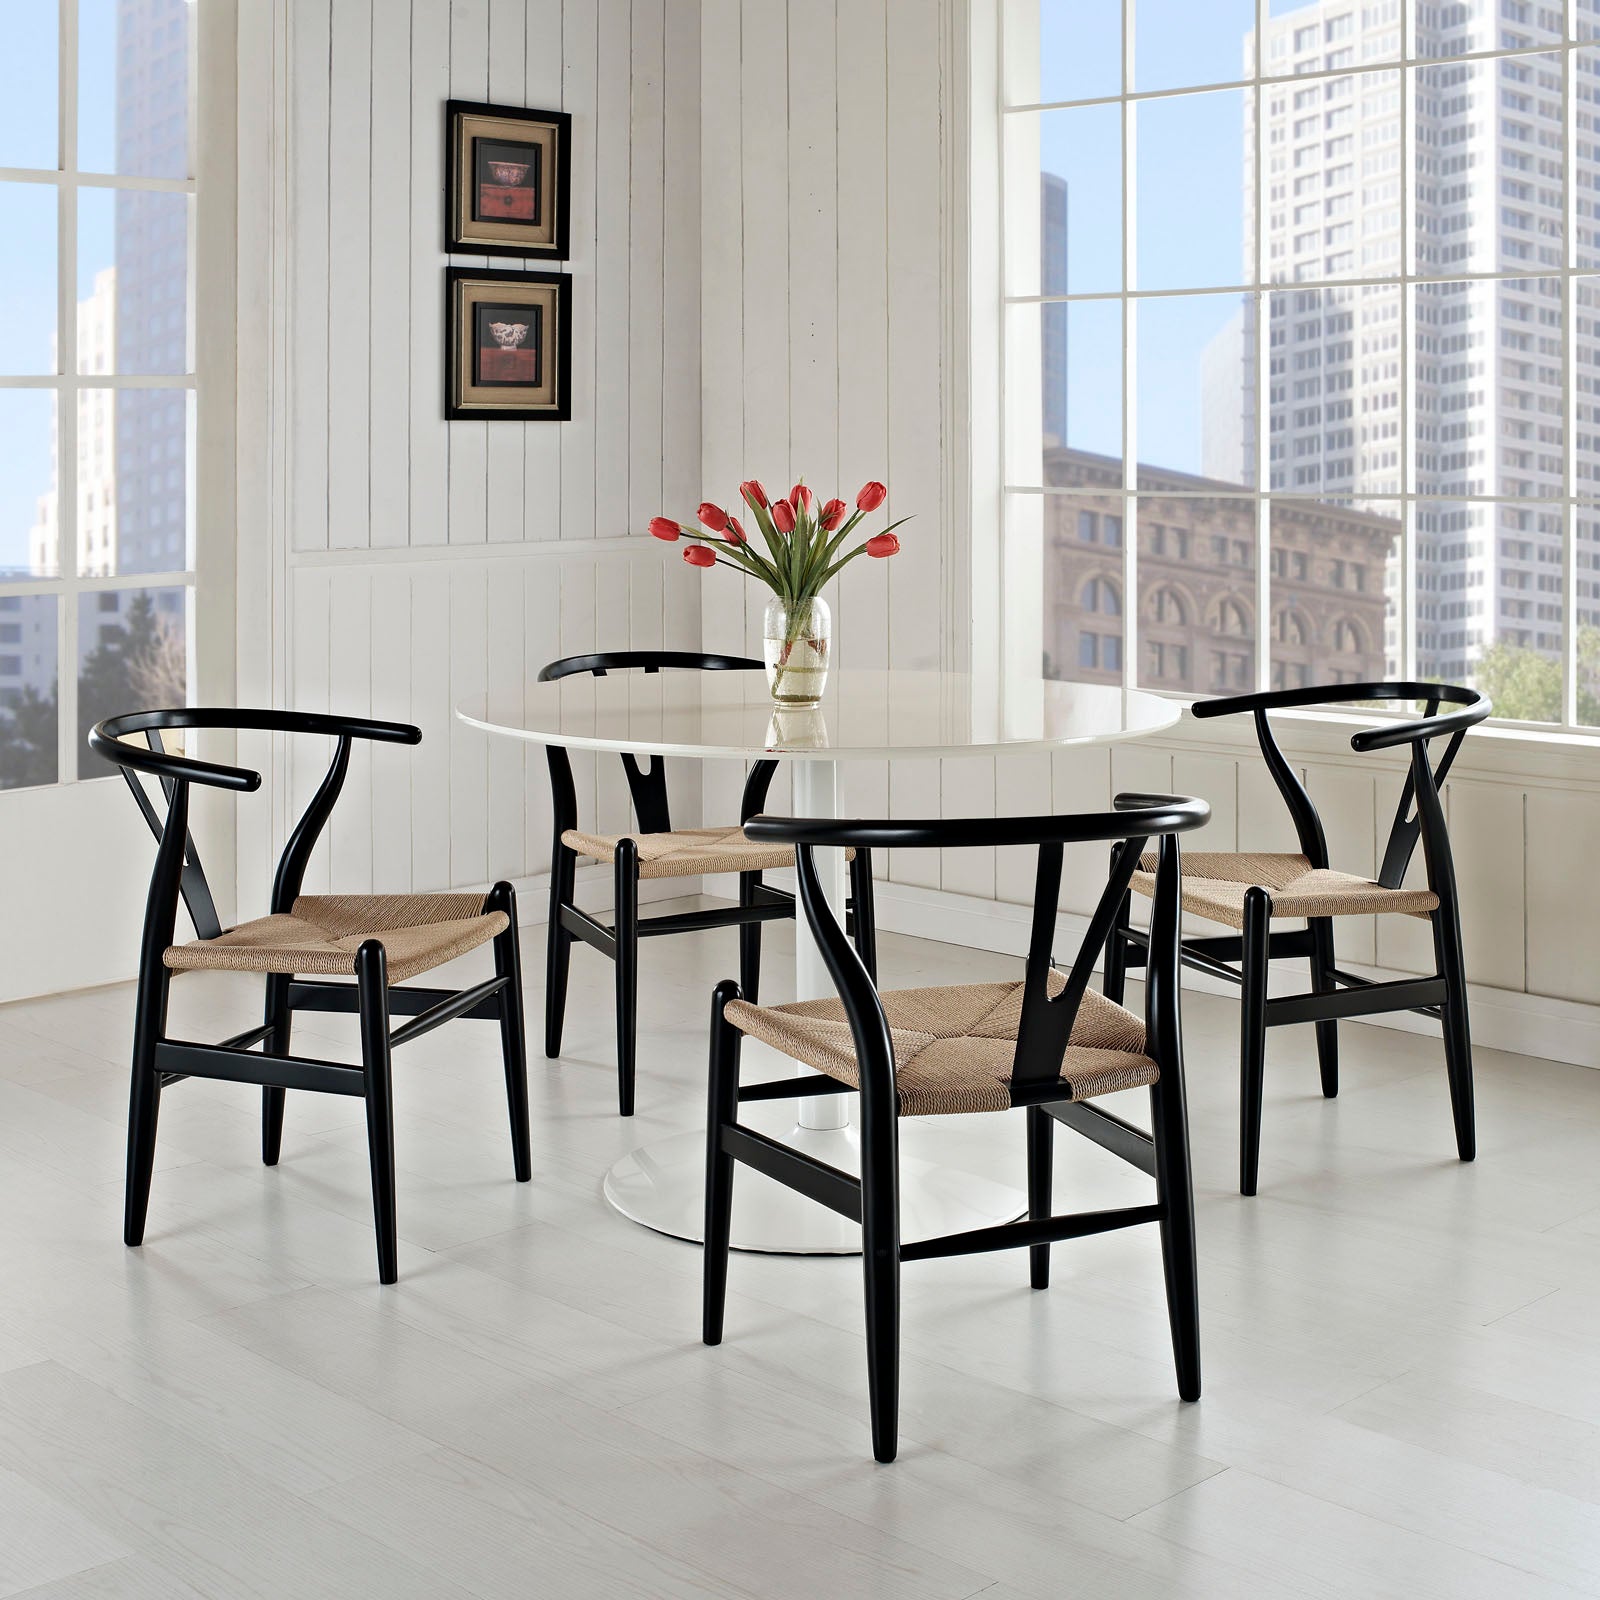 Amish Dining Armchair Set of 4 - East Shore Modern Home Furnishings